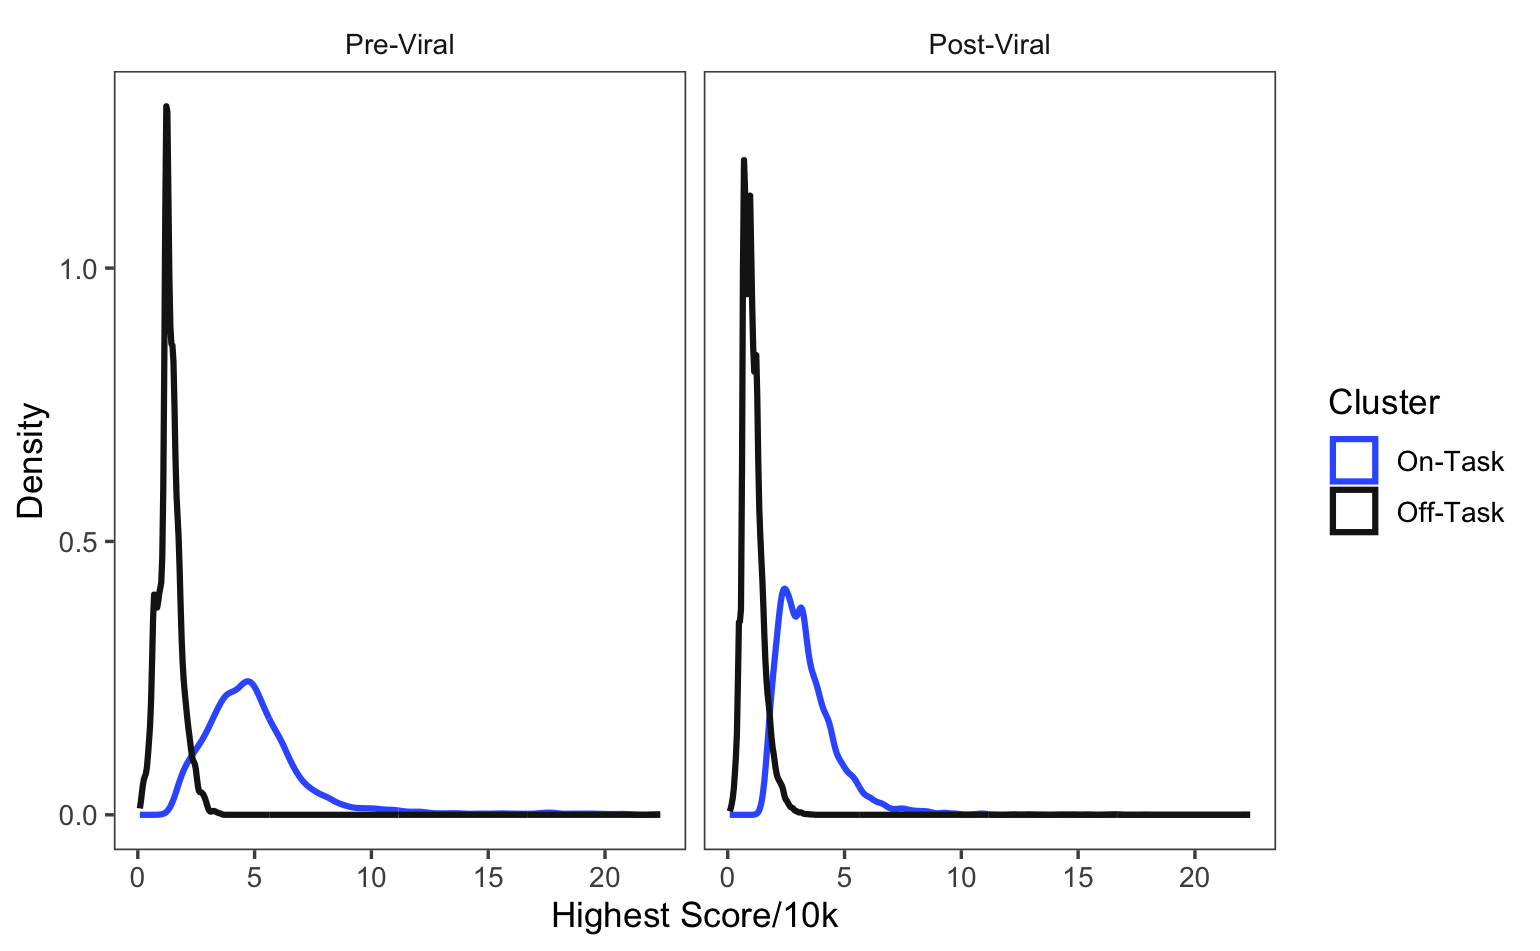 Highest Score Across Clusters in Pre- and Post-Viral Samples